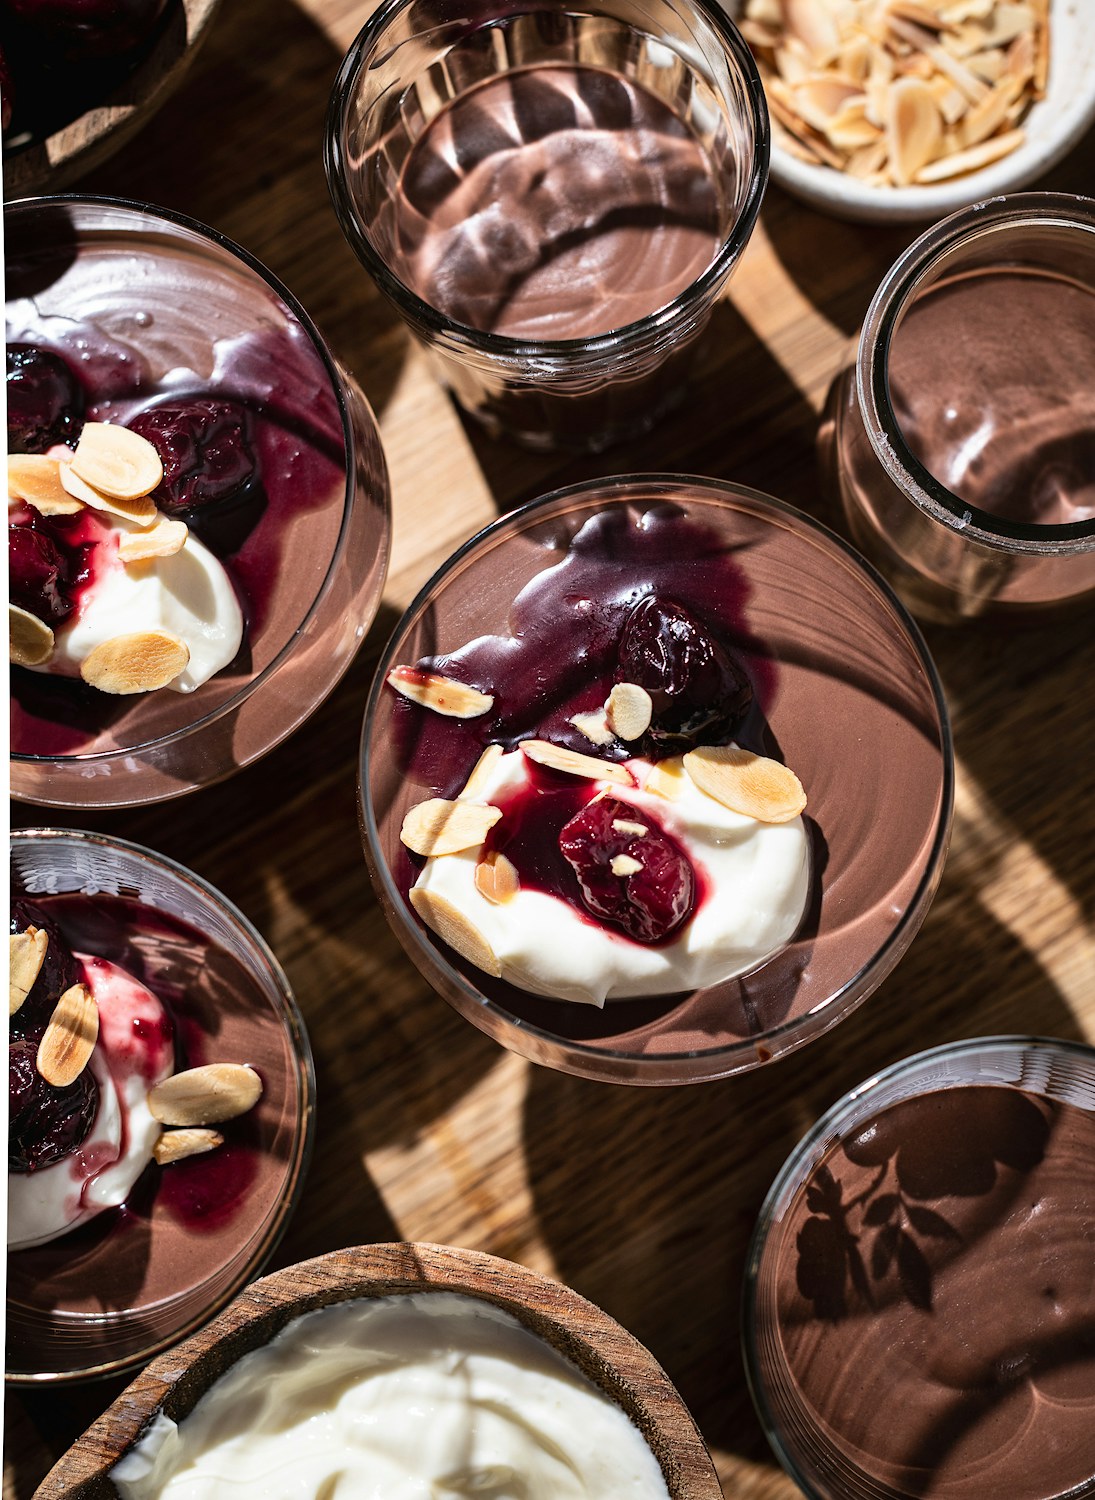 Silky Chocolate and Vanilla Pudding with Cherry Compote